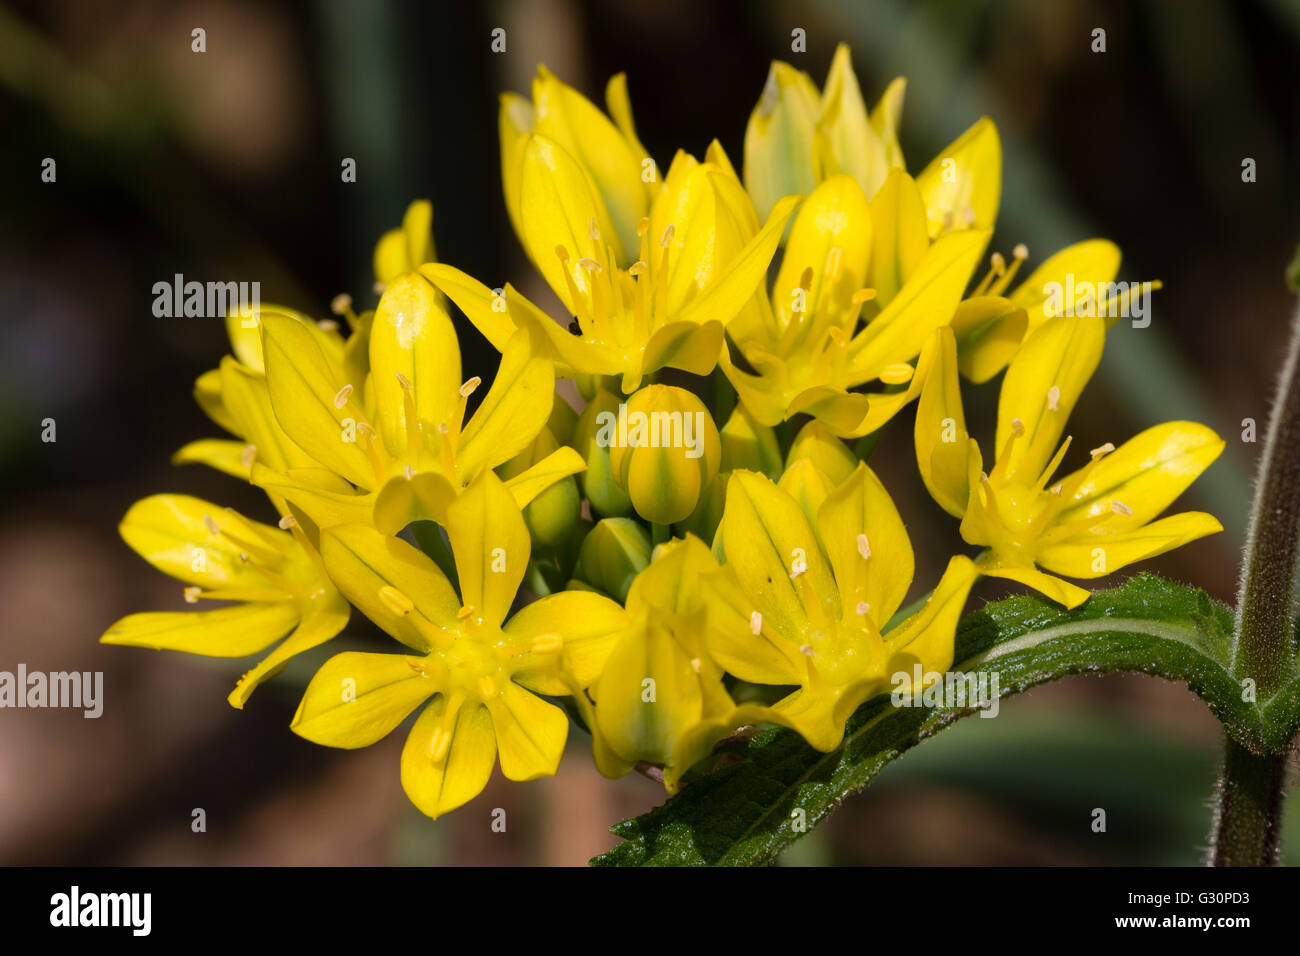 Flower head of the summer blooming yellow bulb, Allium moly Stock Photo